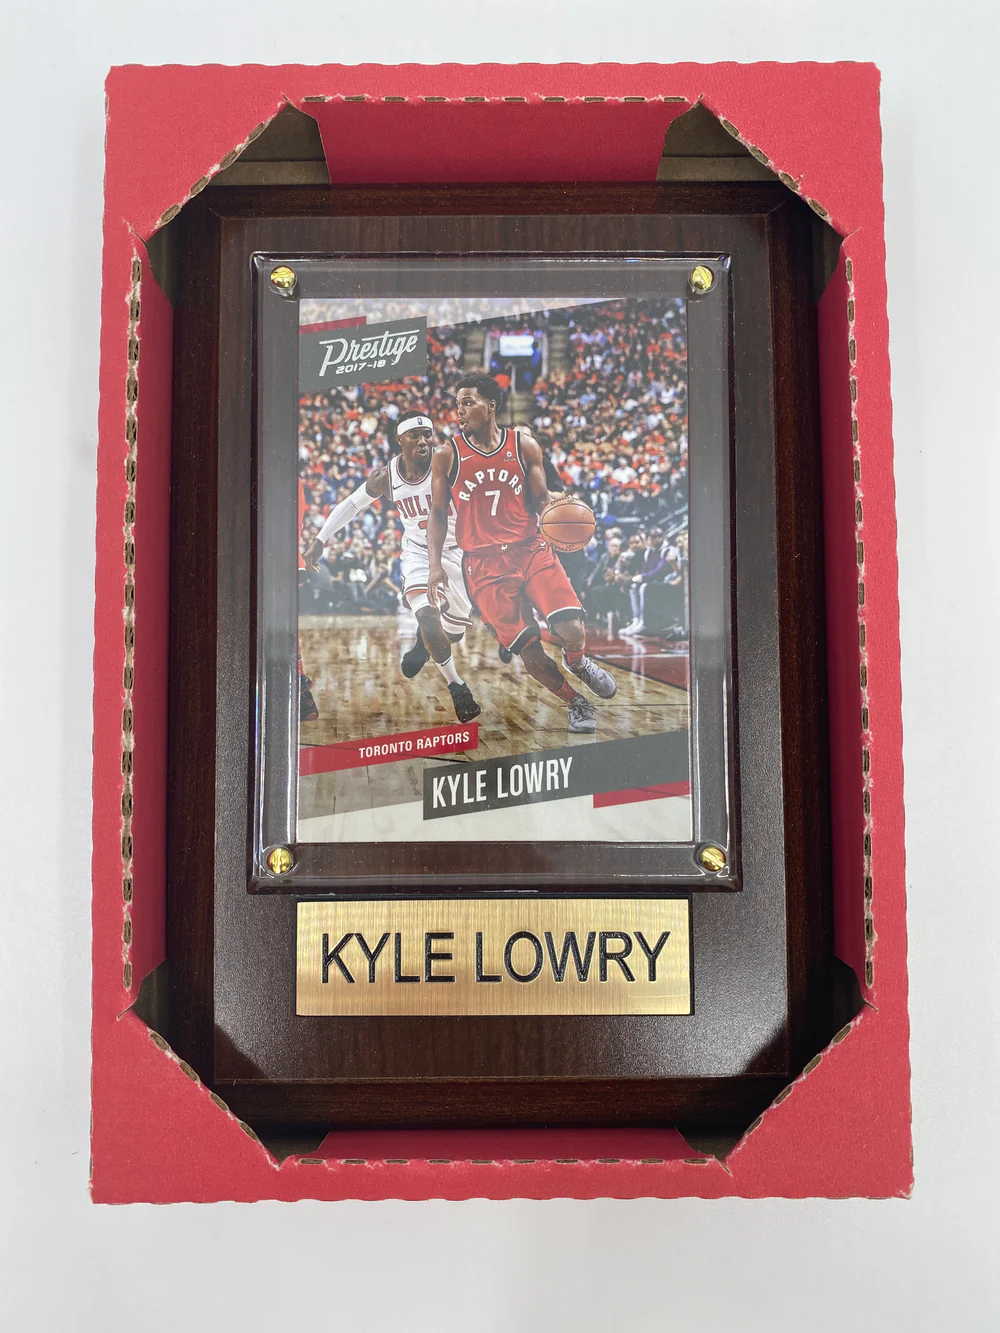 NBA Plaque with card 4x6 Toronto Raptors -  Kyle Lowry (Randomly Selected, May Not Be Pictured)